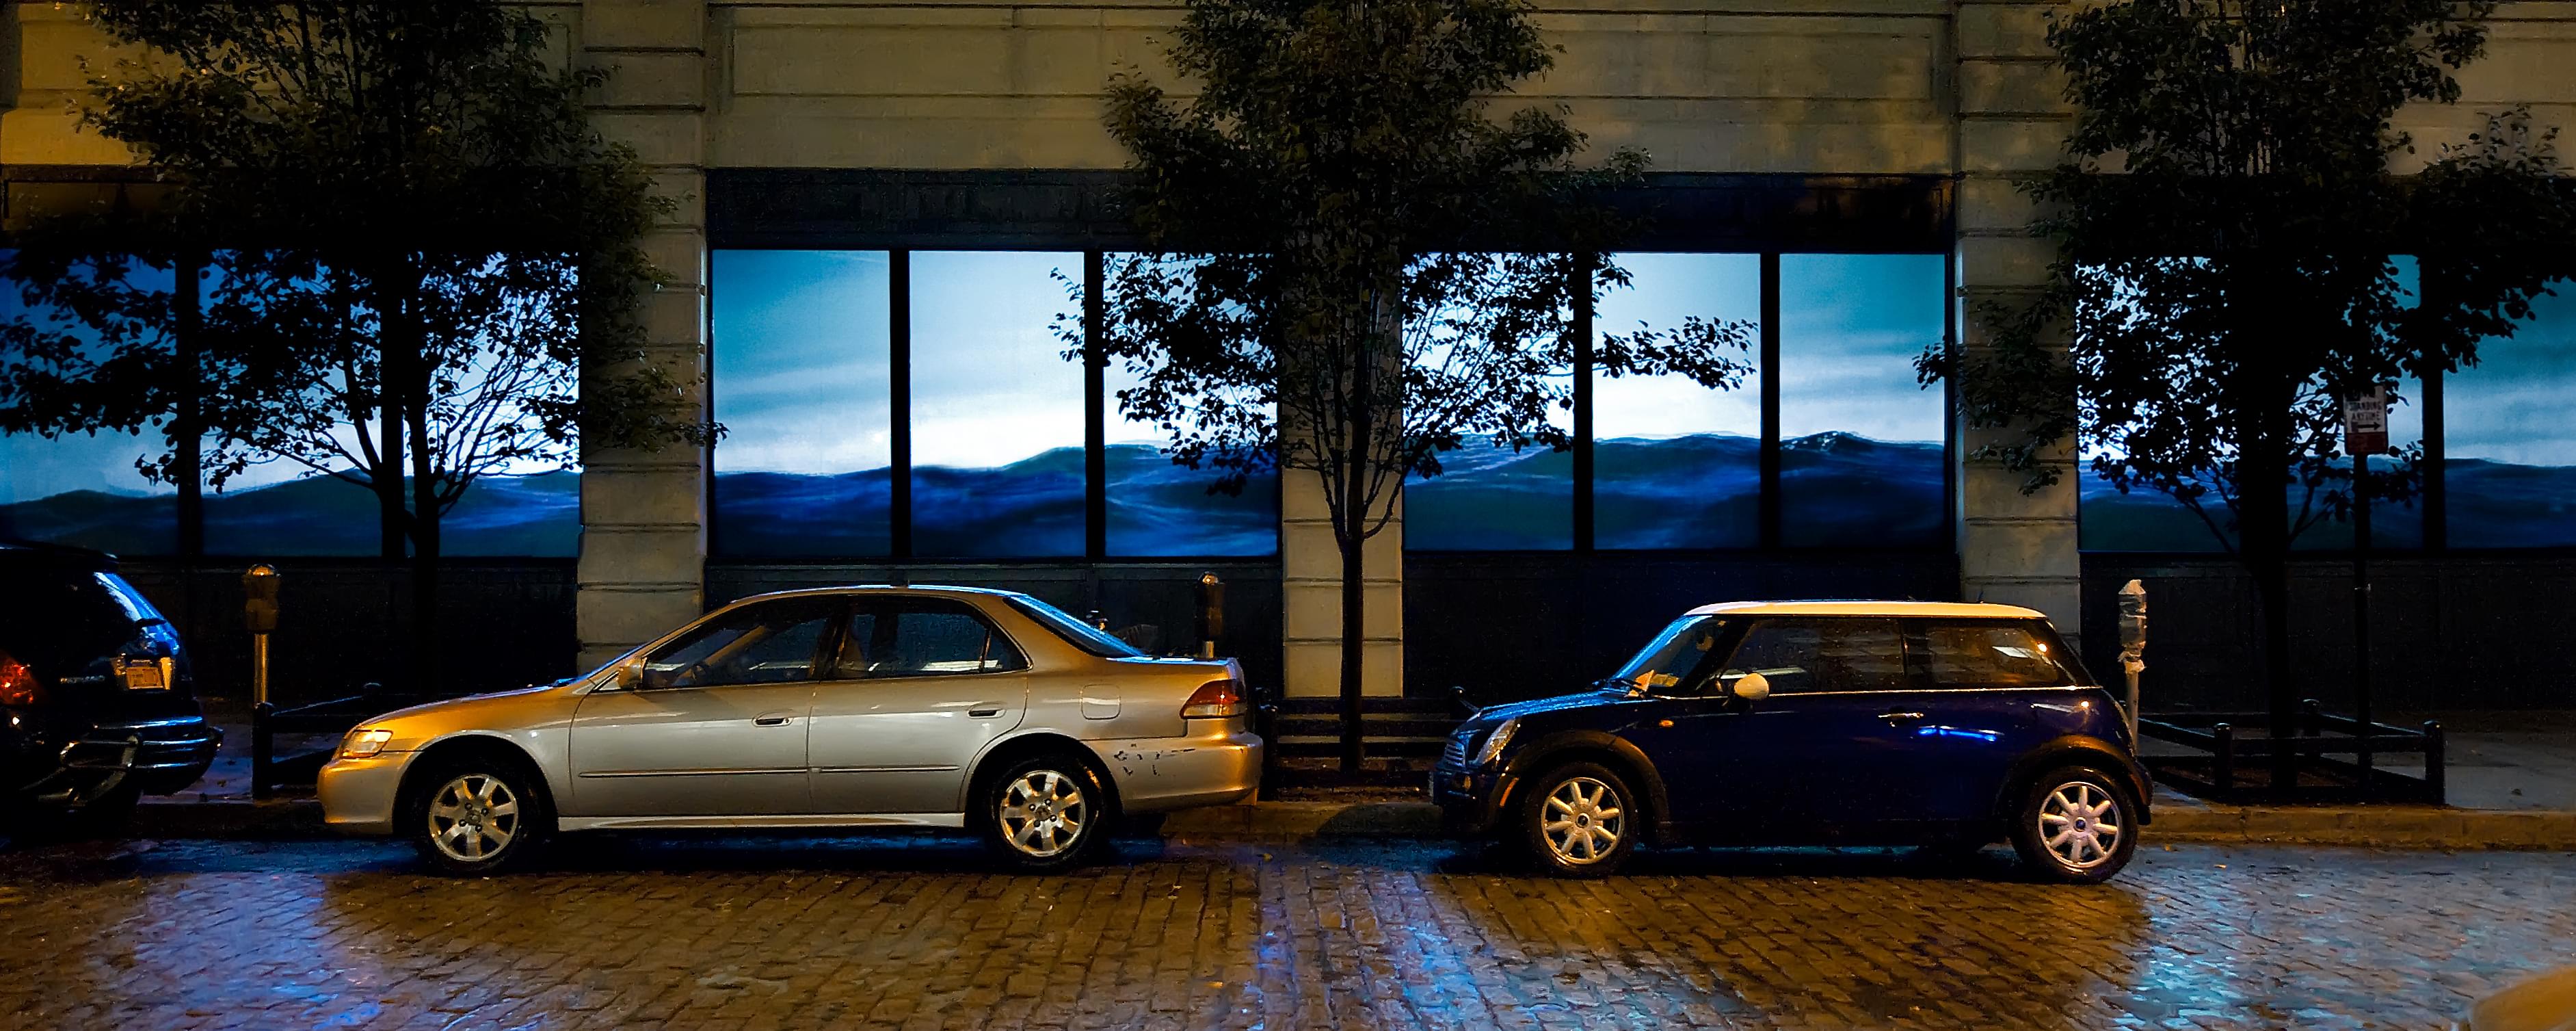 Photograph a building facade at night where, projected onto its street-level windows, is a eye-level view of small ocean waves, presumably bobbing up and down. In front of the building are two parked cars.